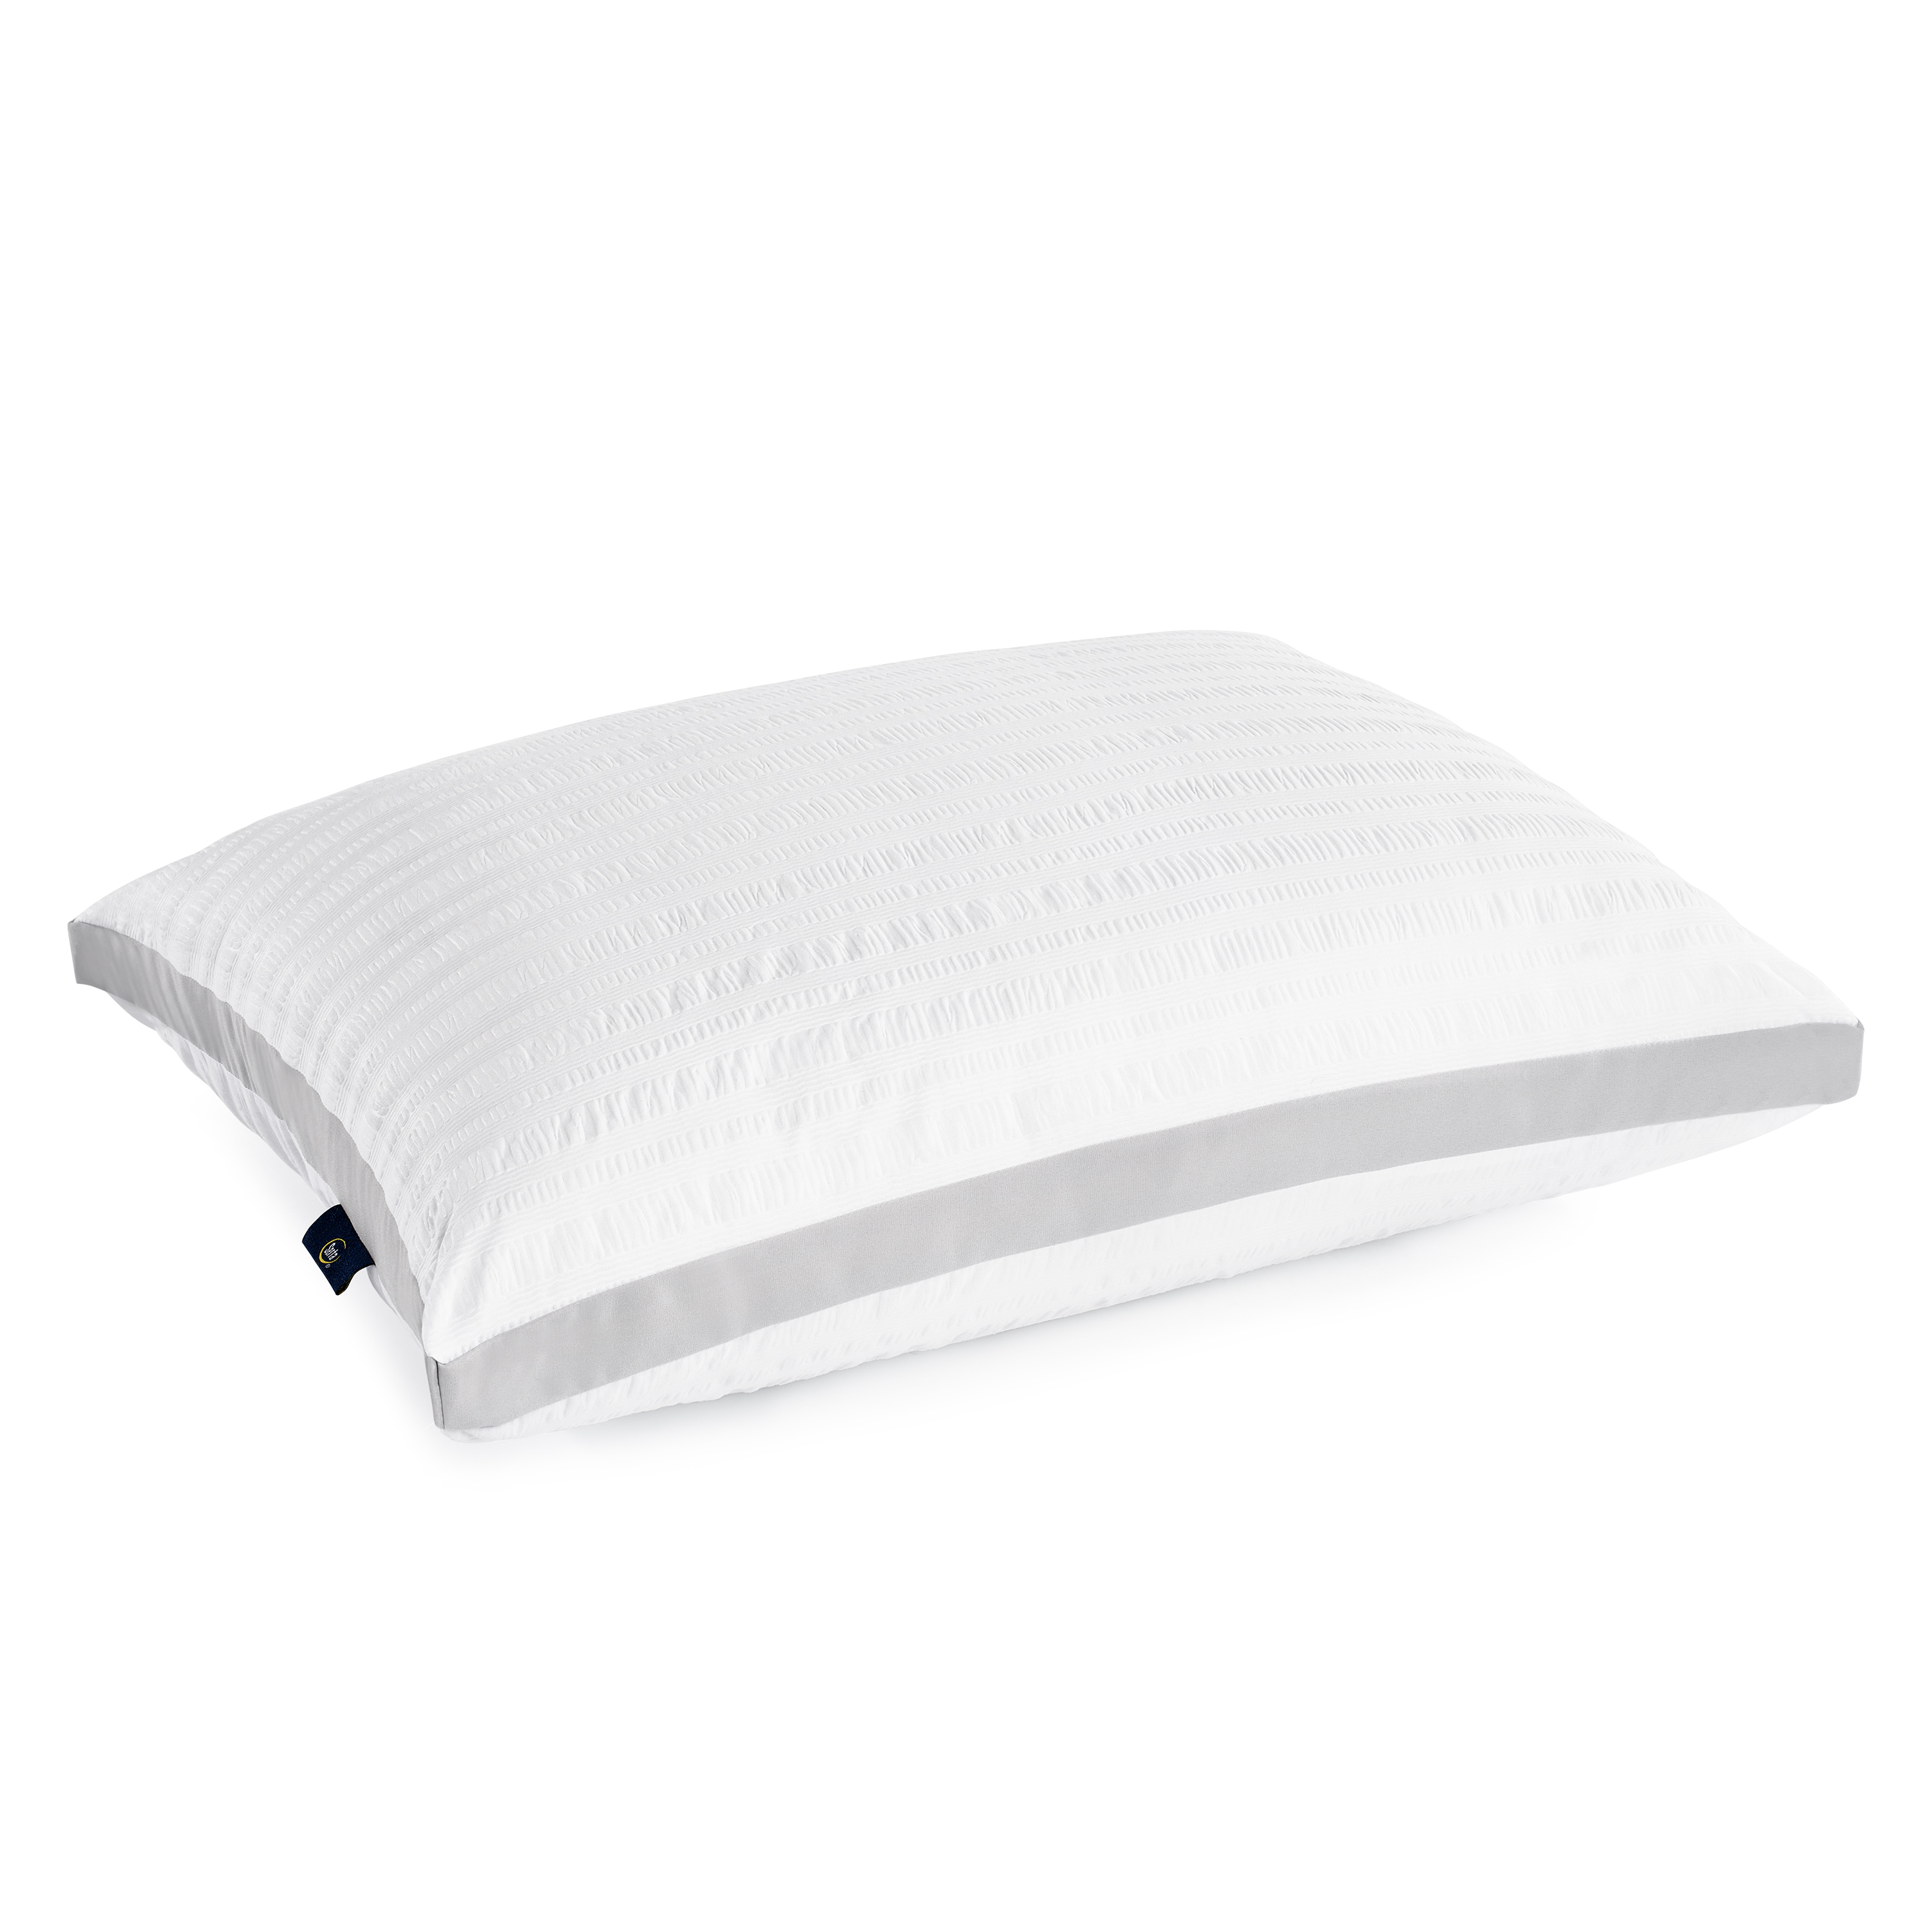 SertaPedic Dreamloft Bed Pillow, Polyester Fill, All Ages, Standard Size (20"x26") - image 4 of 6